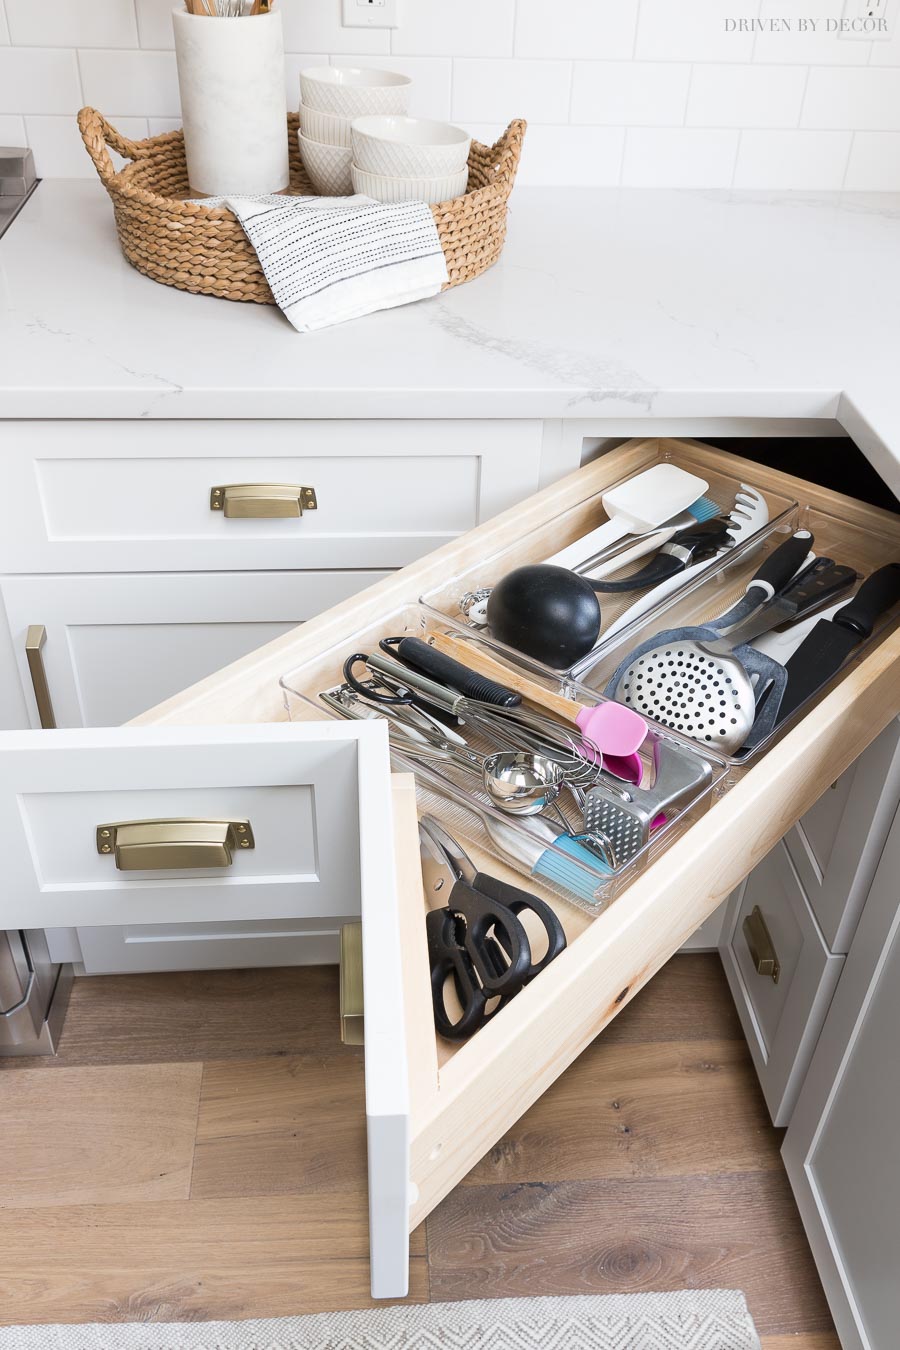 Kitchen corner drawers - such smart use of the corner space in a kitchen!!